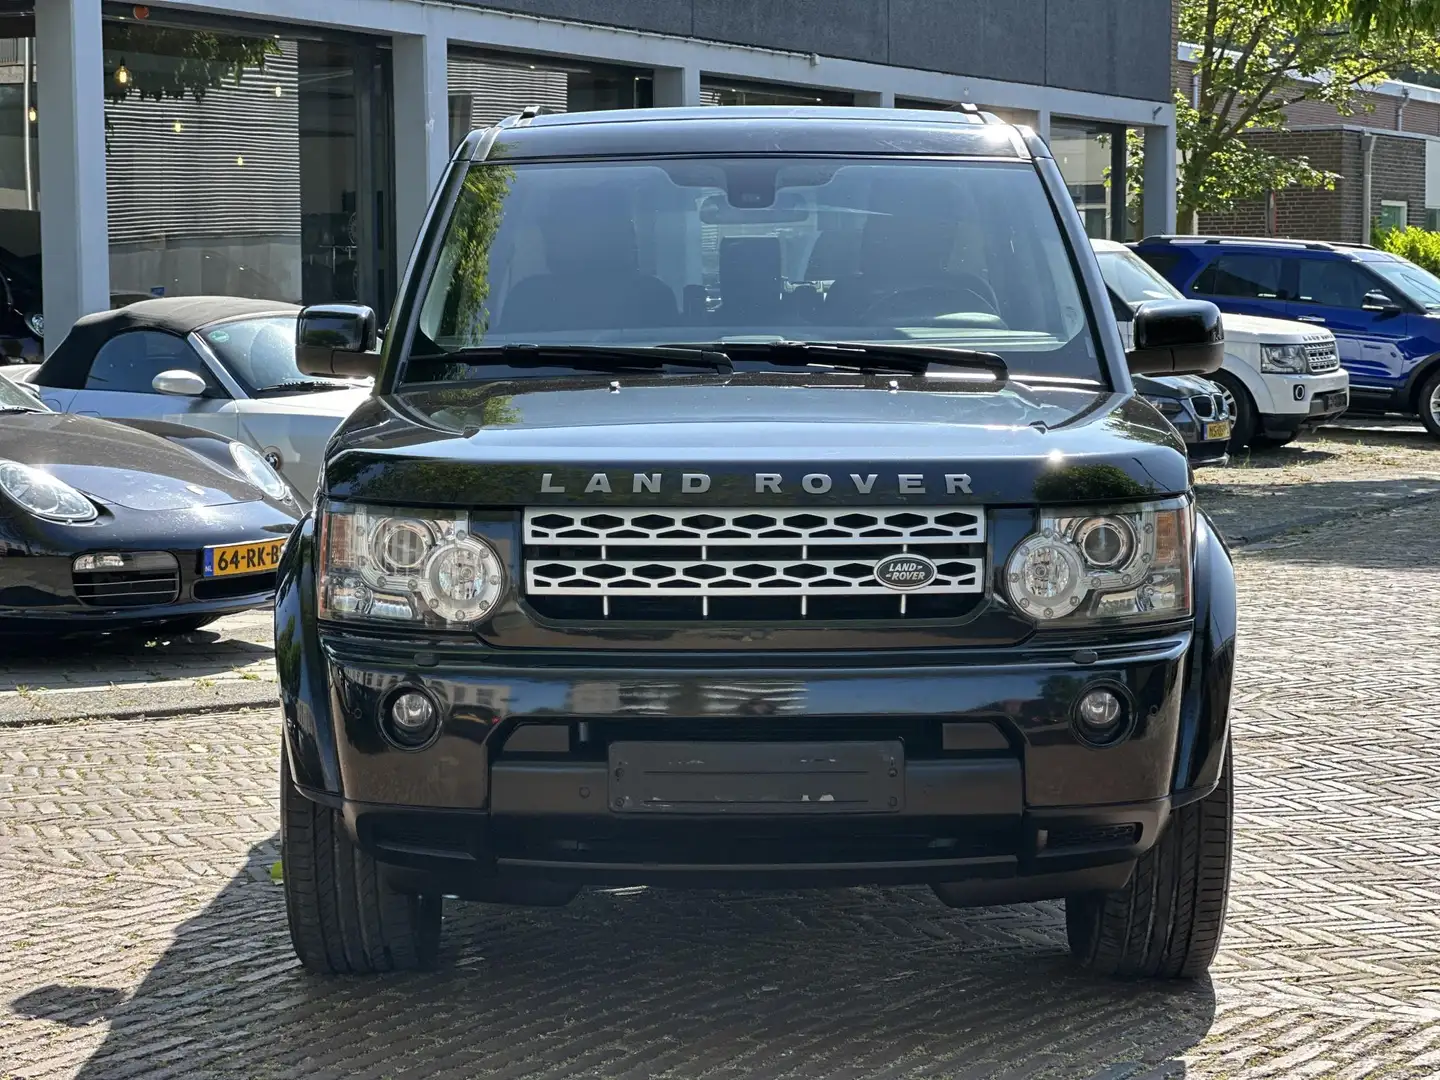 Land Rover Discovery 5.0 V8 HSE 5.0 Hse - 2